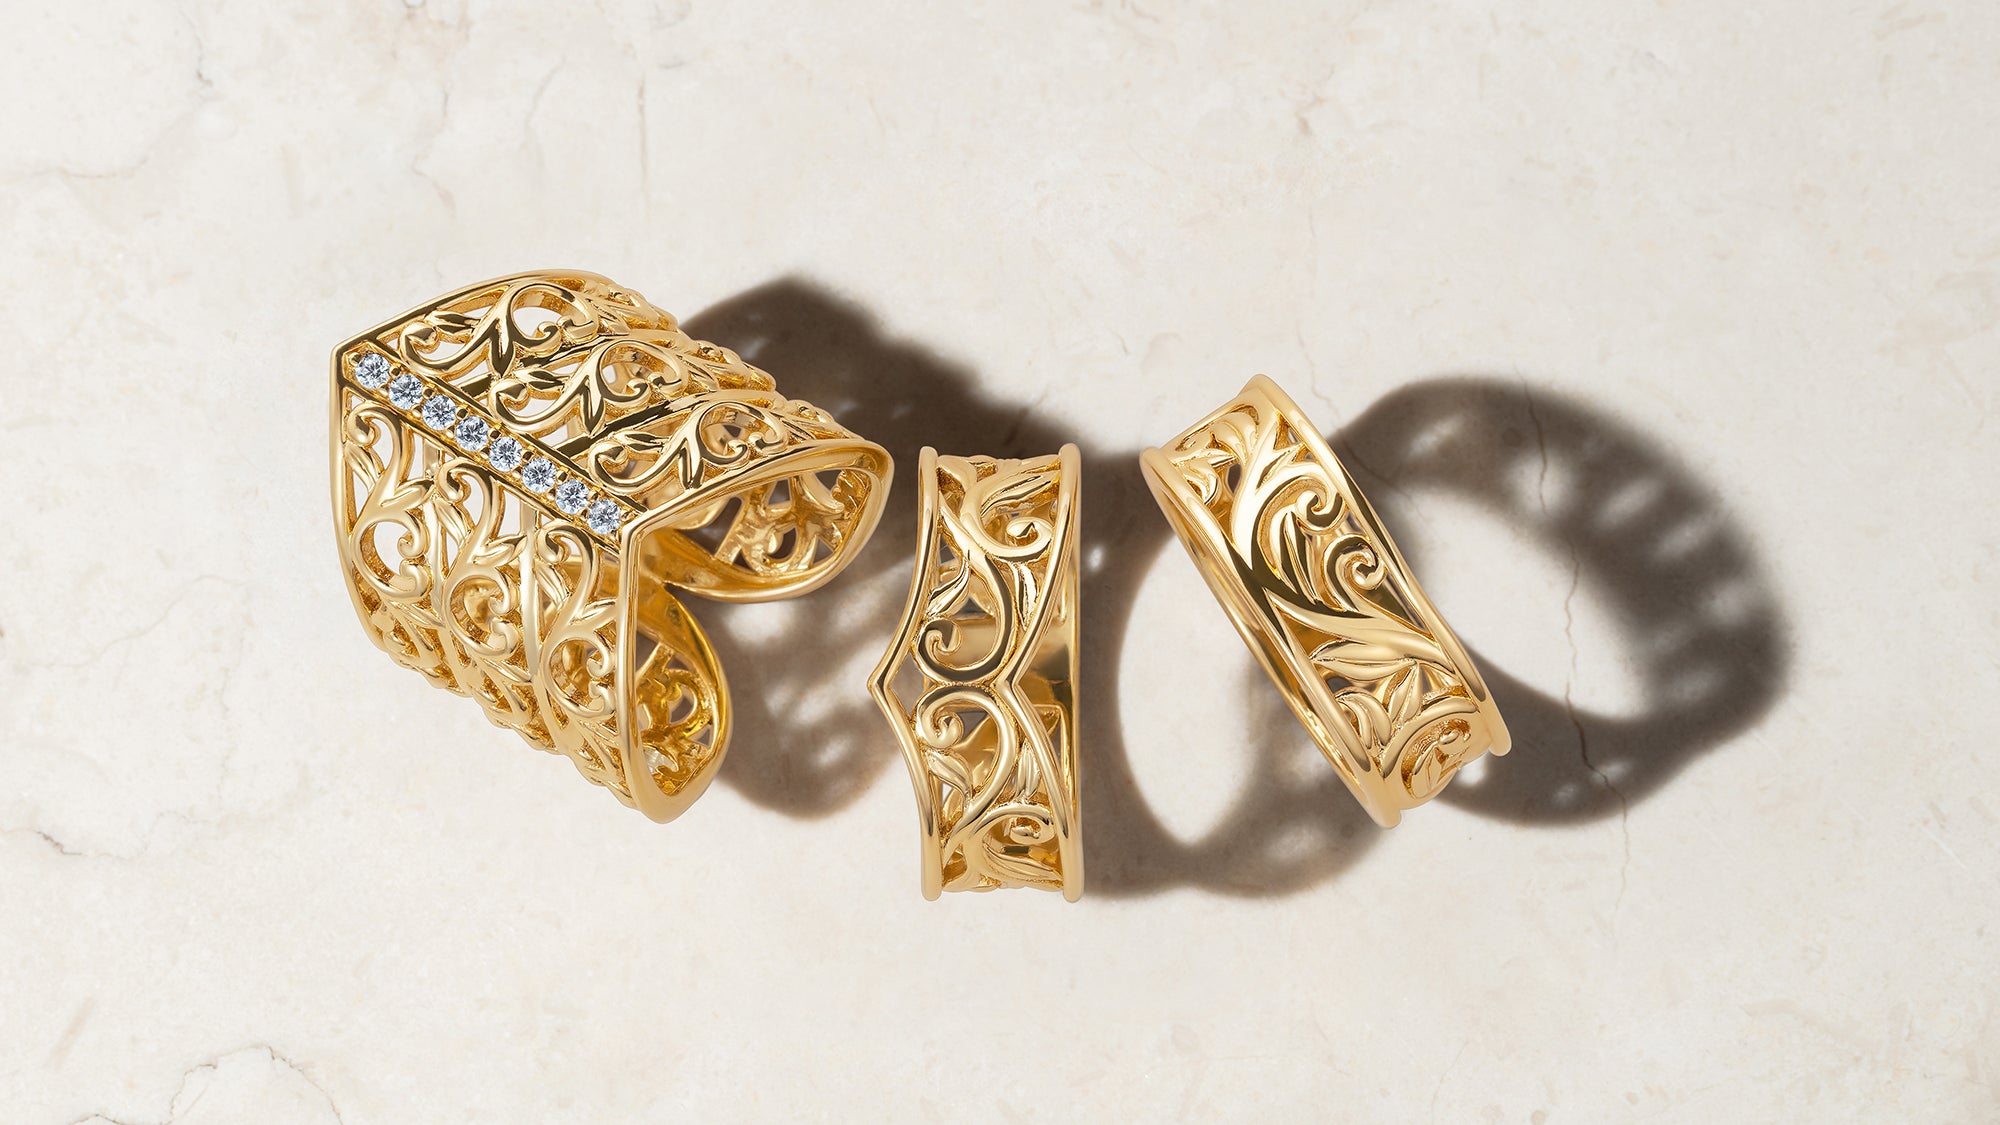 A match made in heaven: Ethical jewellery brand Lebrusan Studio launches its Artisan Filigree Collection of stackable jacket rings